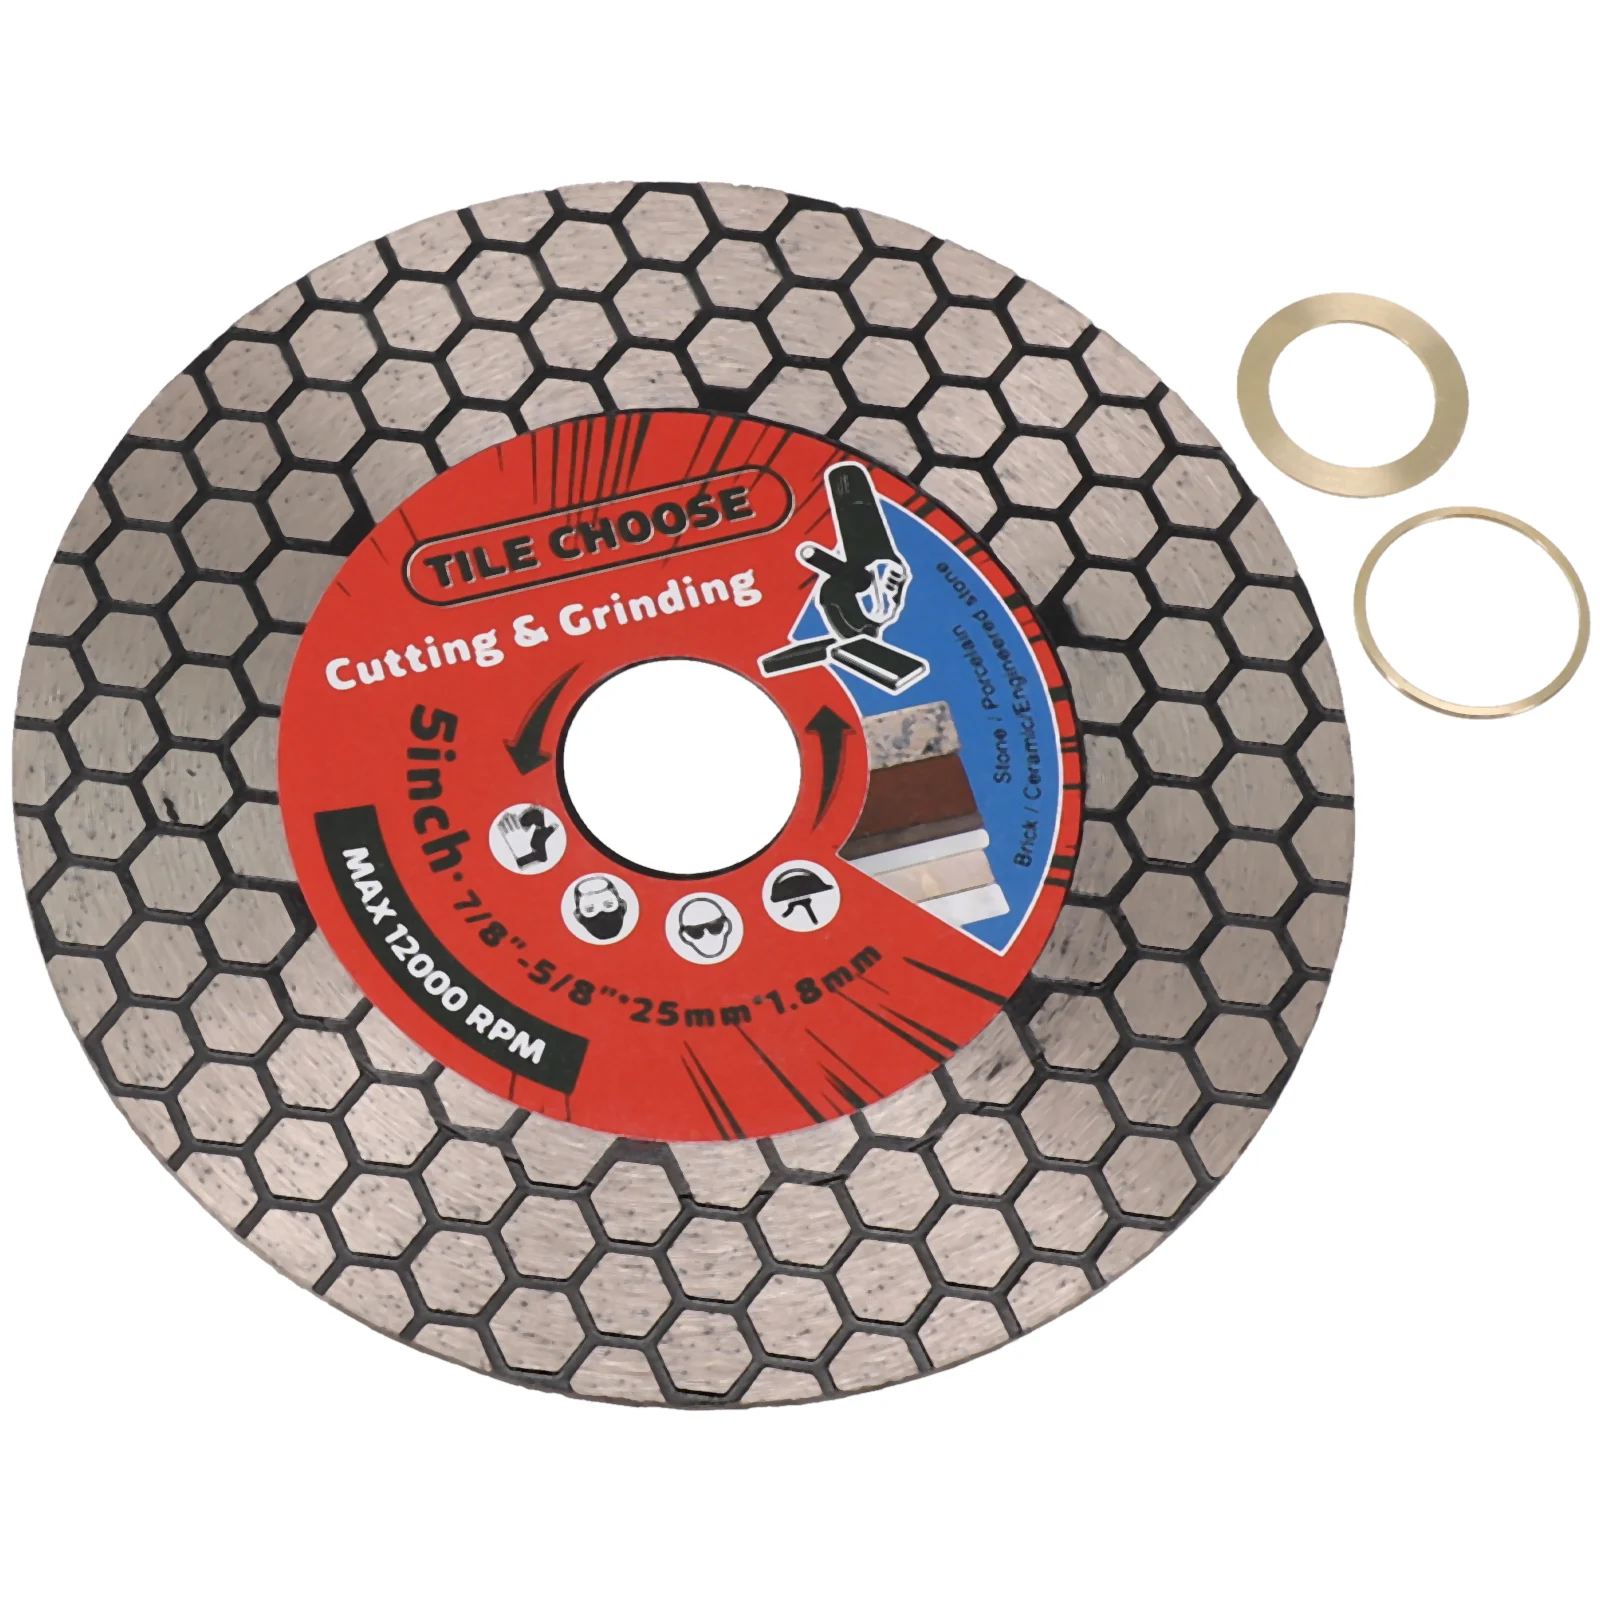 

115mm/125mm Diamond Cutting Disc Ceramic Tile Porcelain Marble Circular Saw Blade For Angle Grinder Cutting Grinding Stone